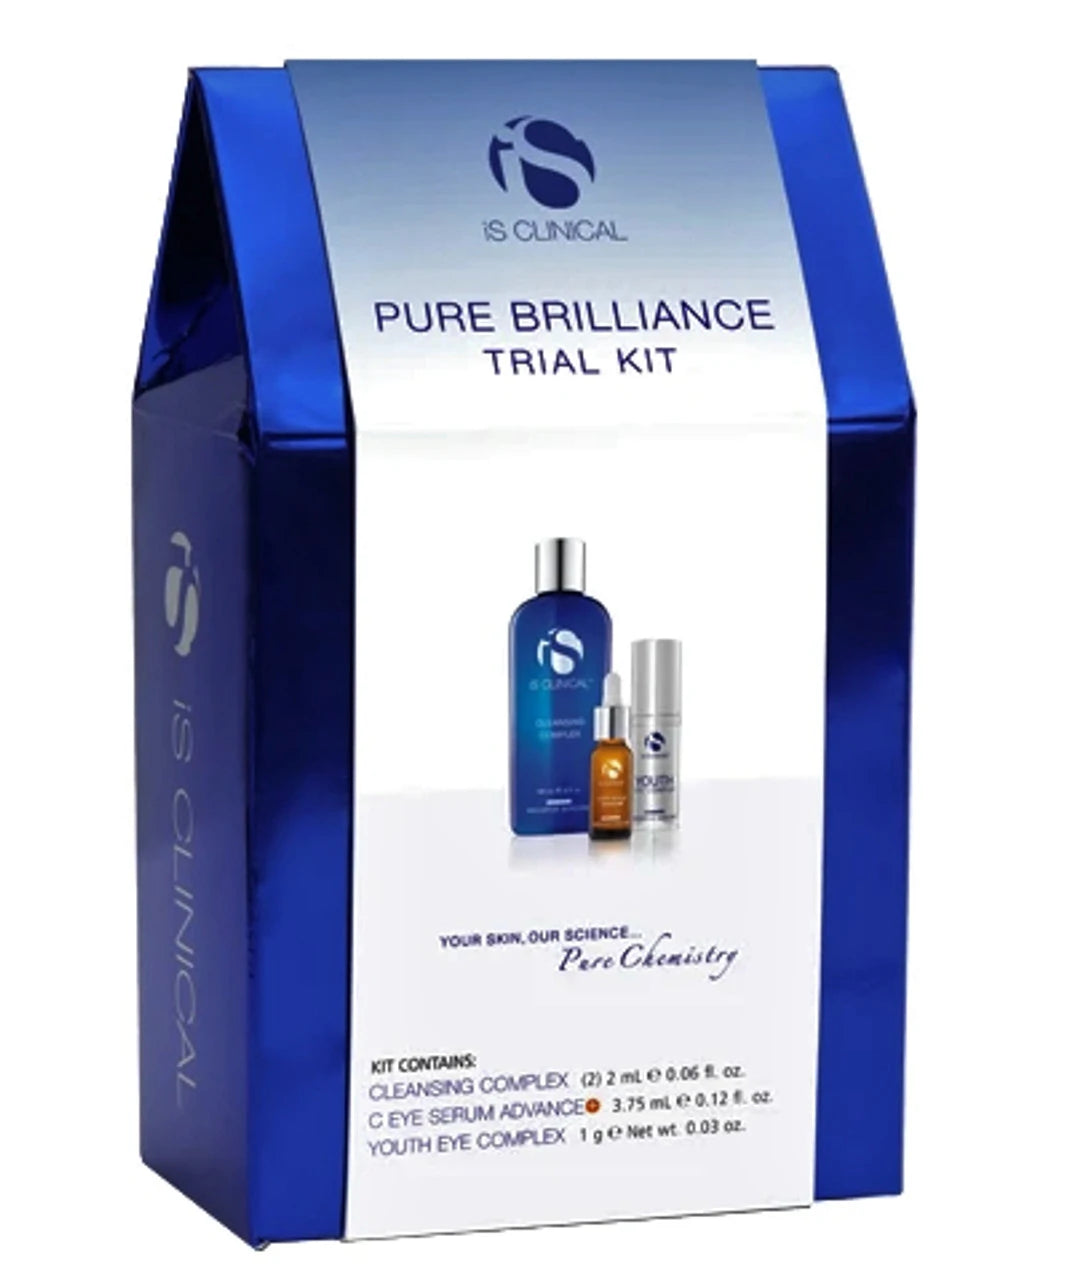 iS Clinical Pure Brilliance Trial Kit